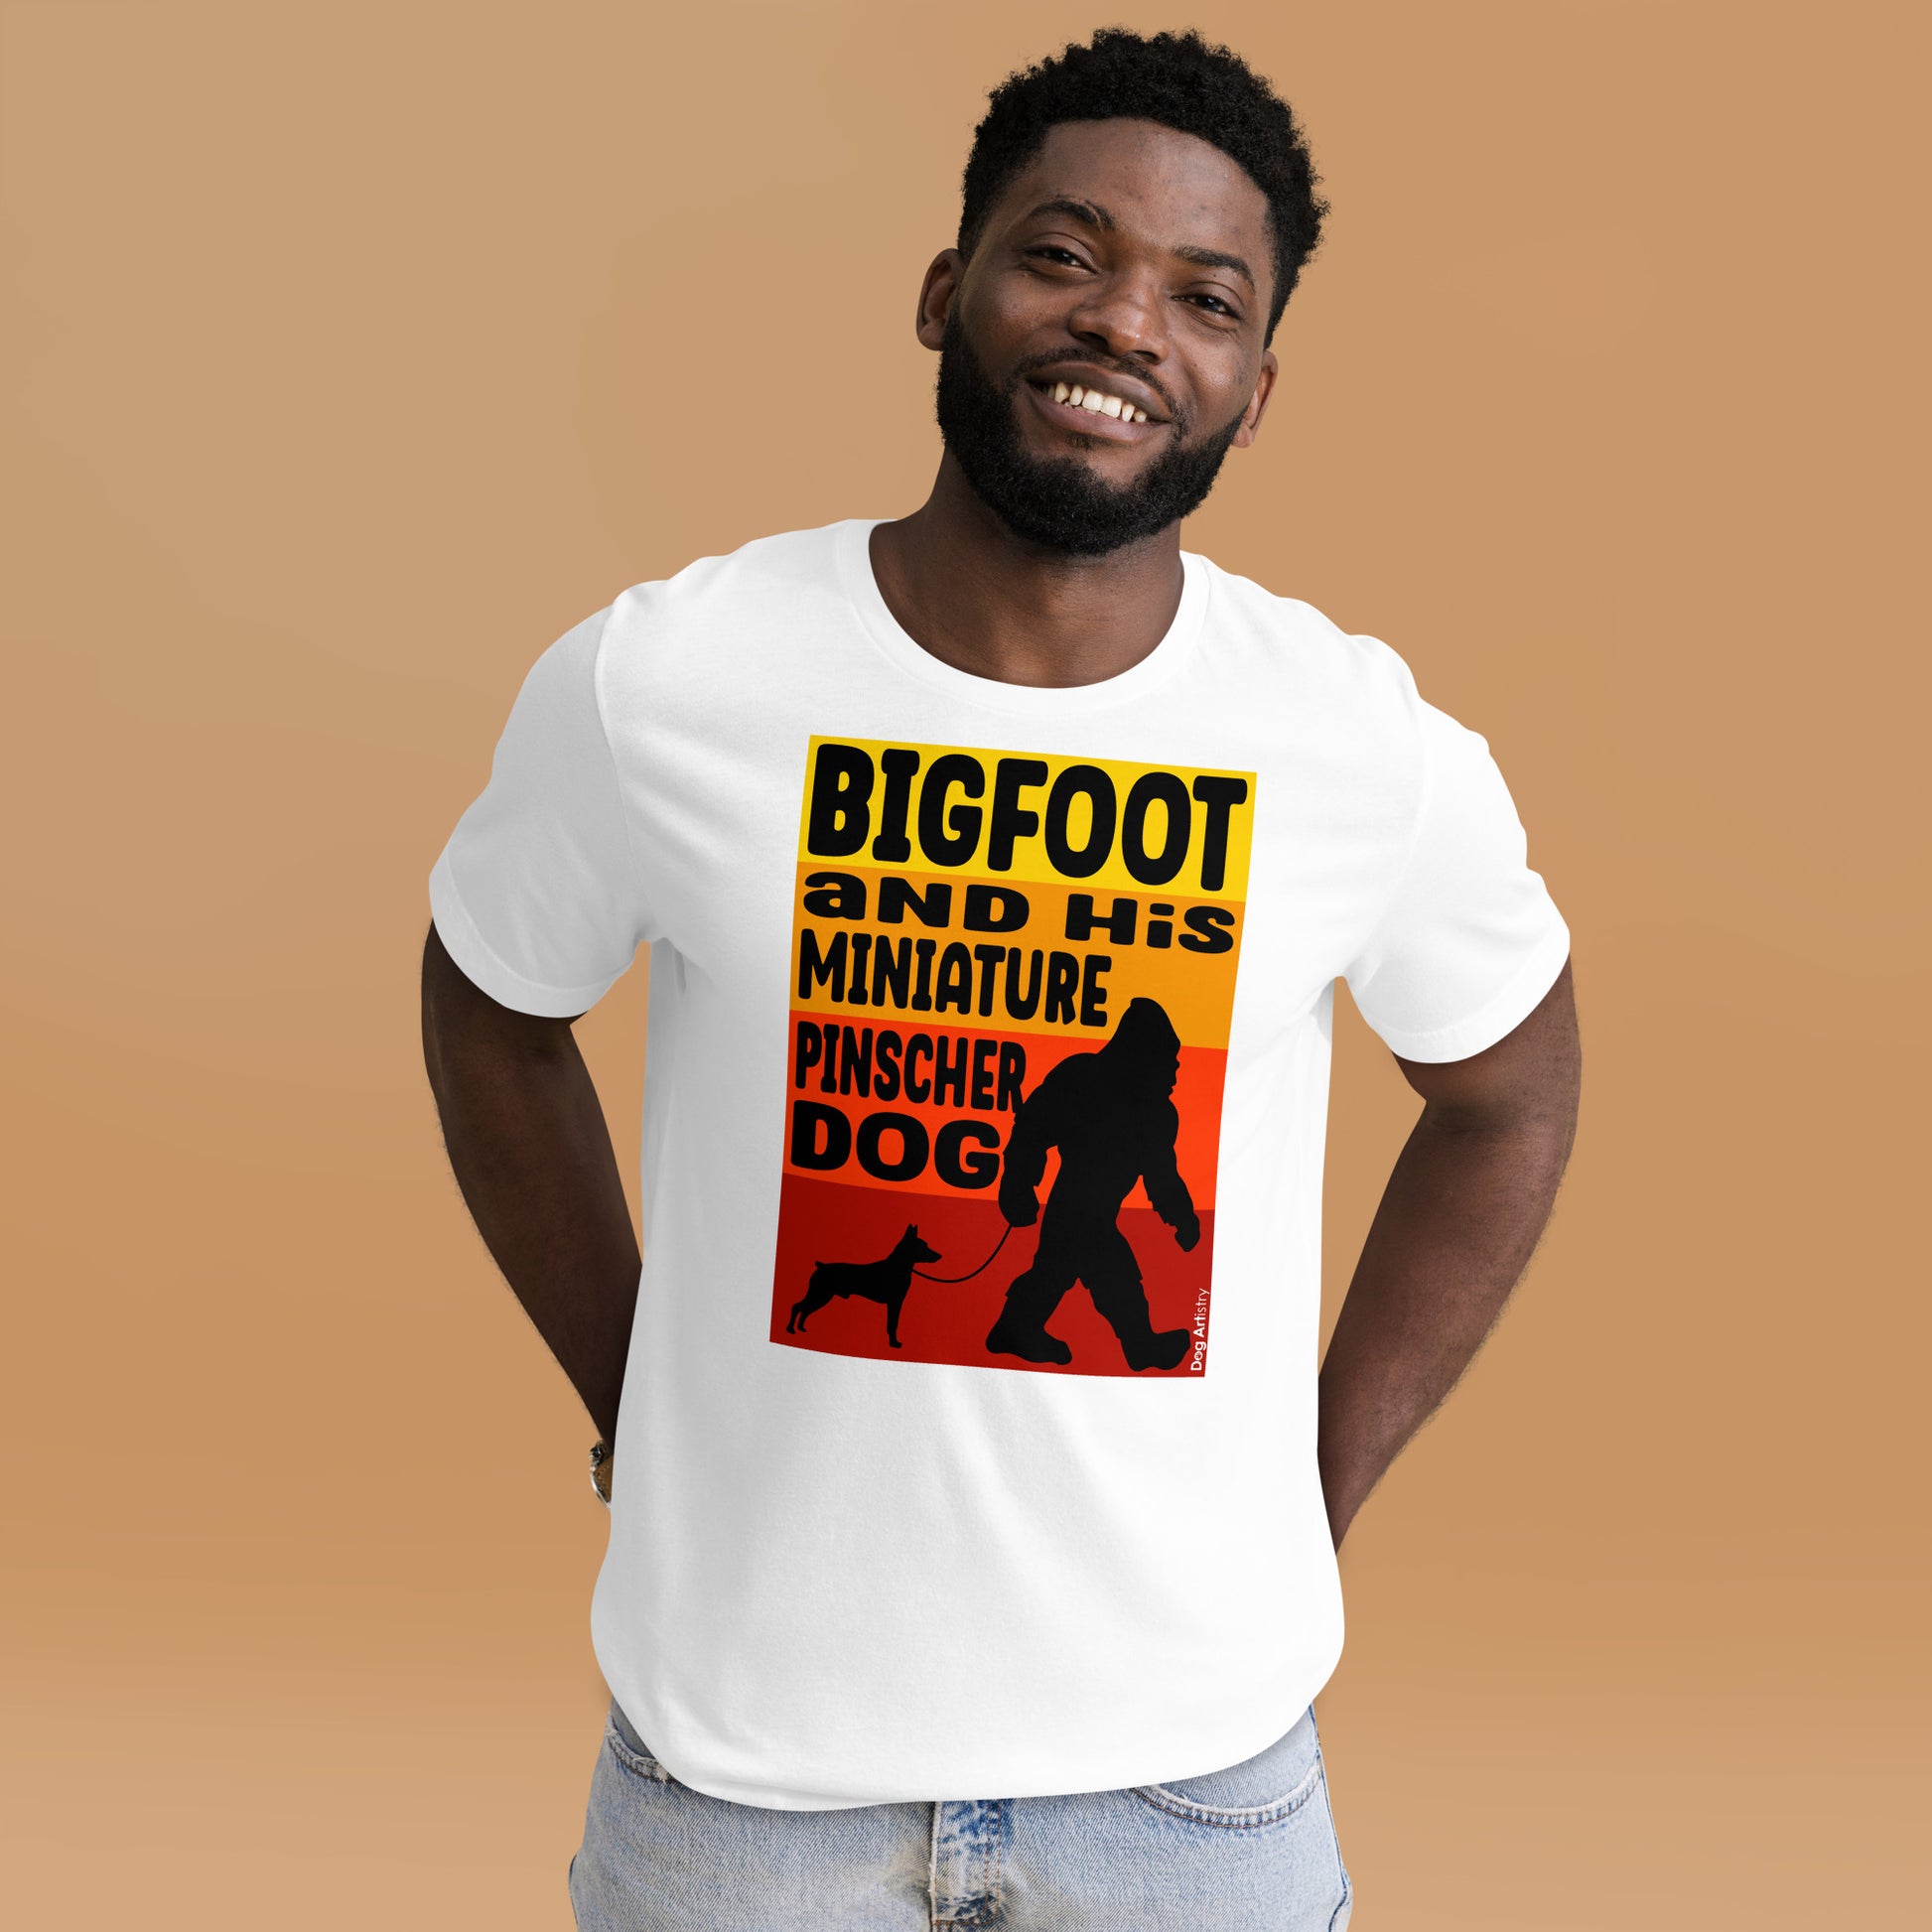 Bigfoot and his Miniature Pinscher unisex white t-shirt by Dog Artistry.